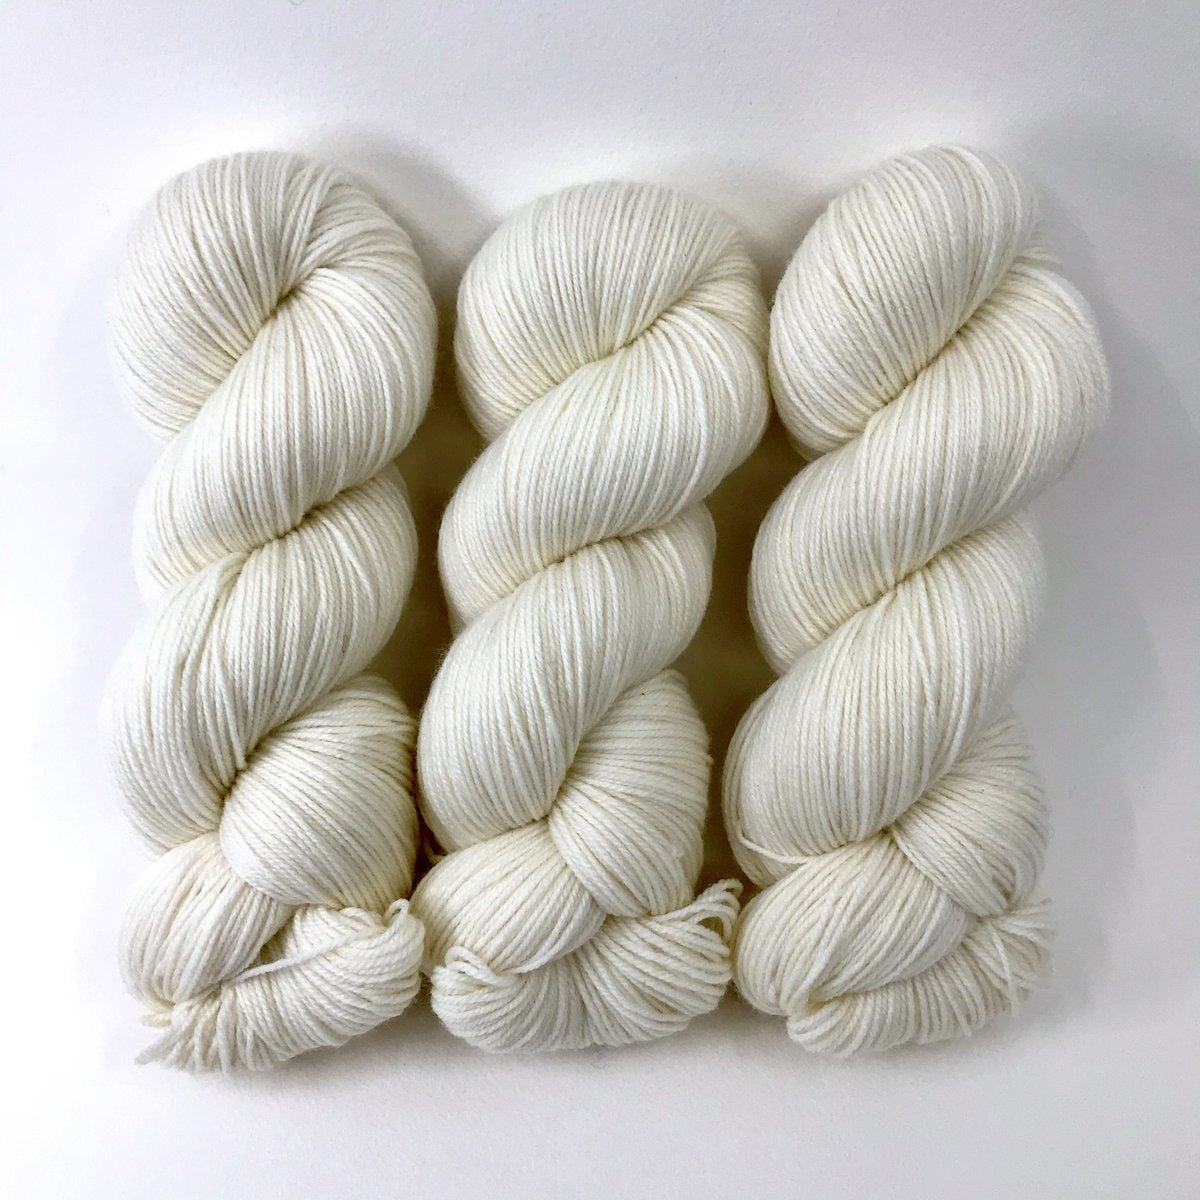 White - Revival Worsted - Dyed Stock